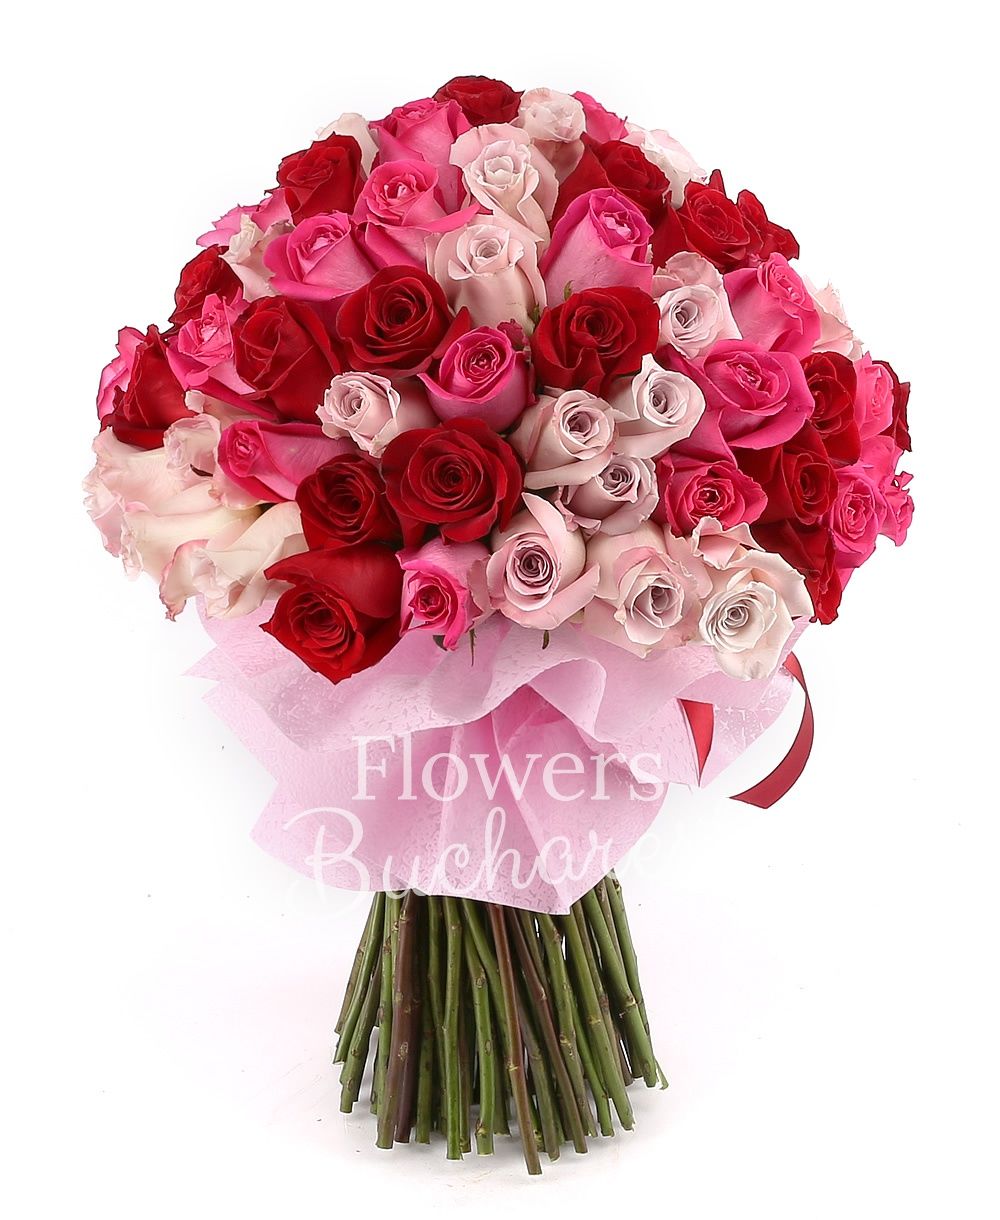 33 pink roses, 33 red roses, 33 cyclam roses